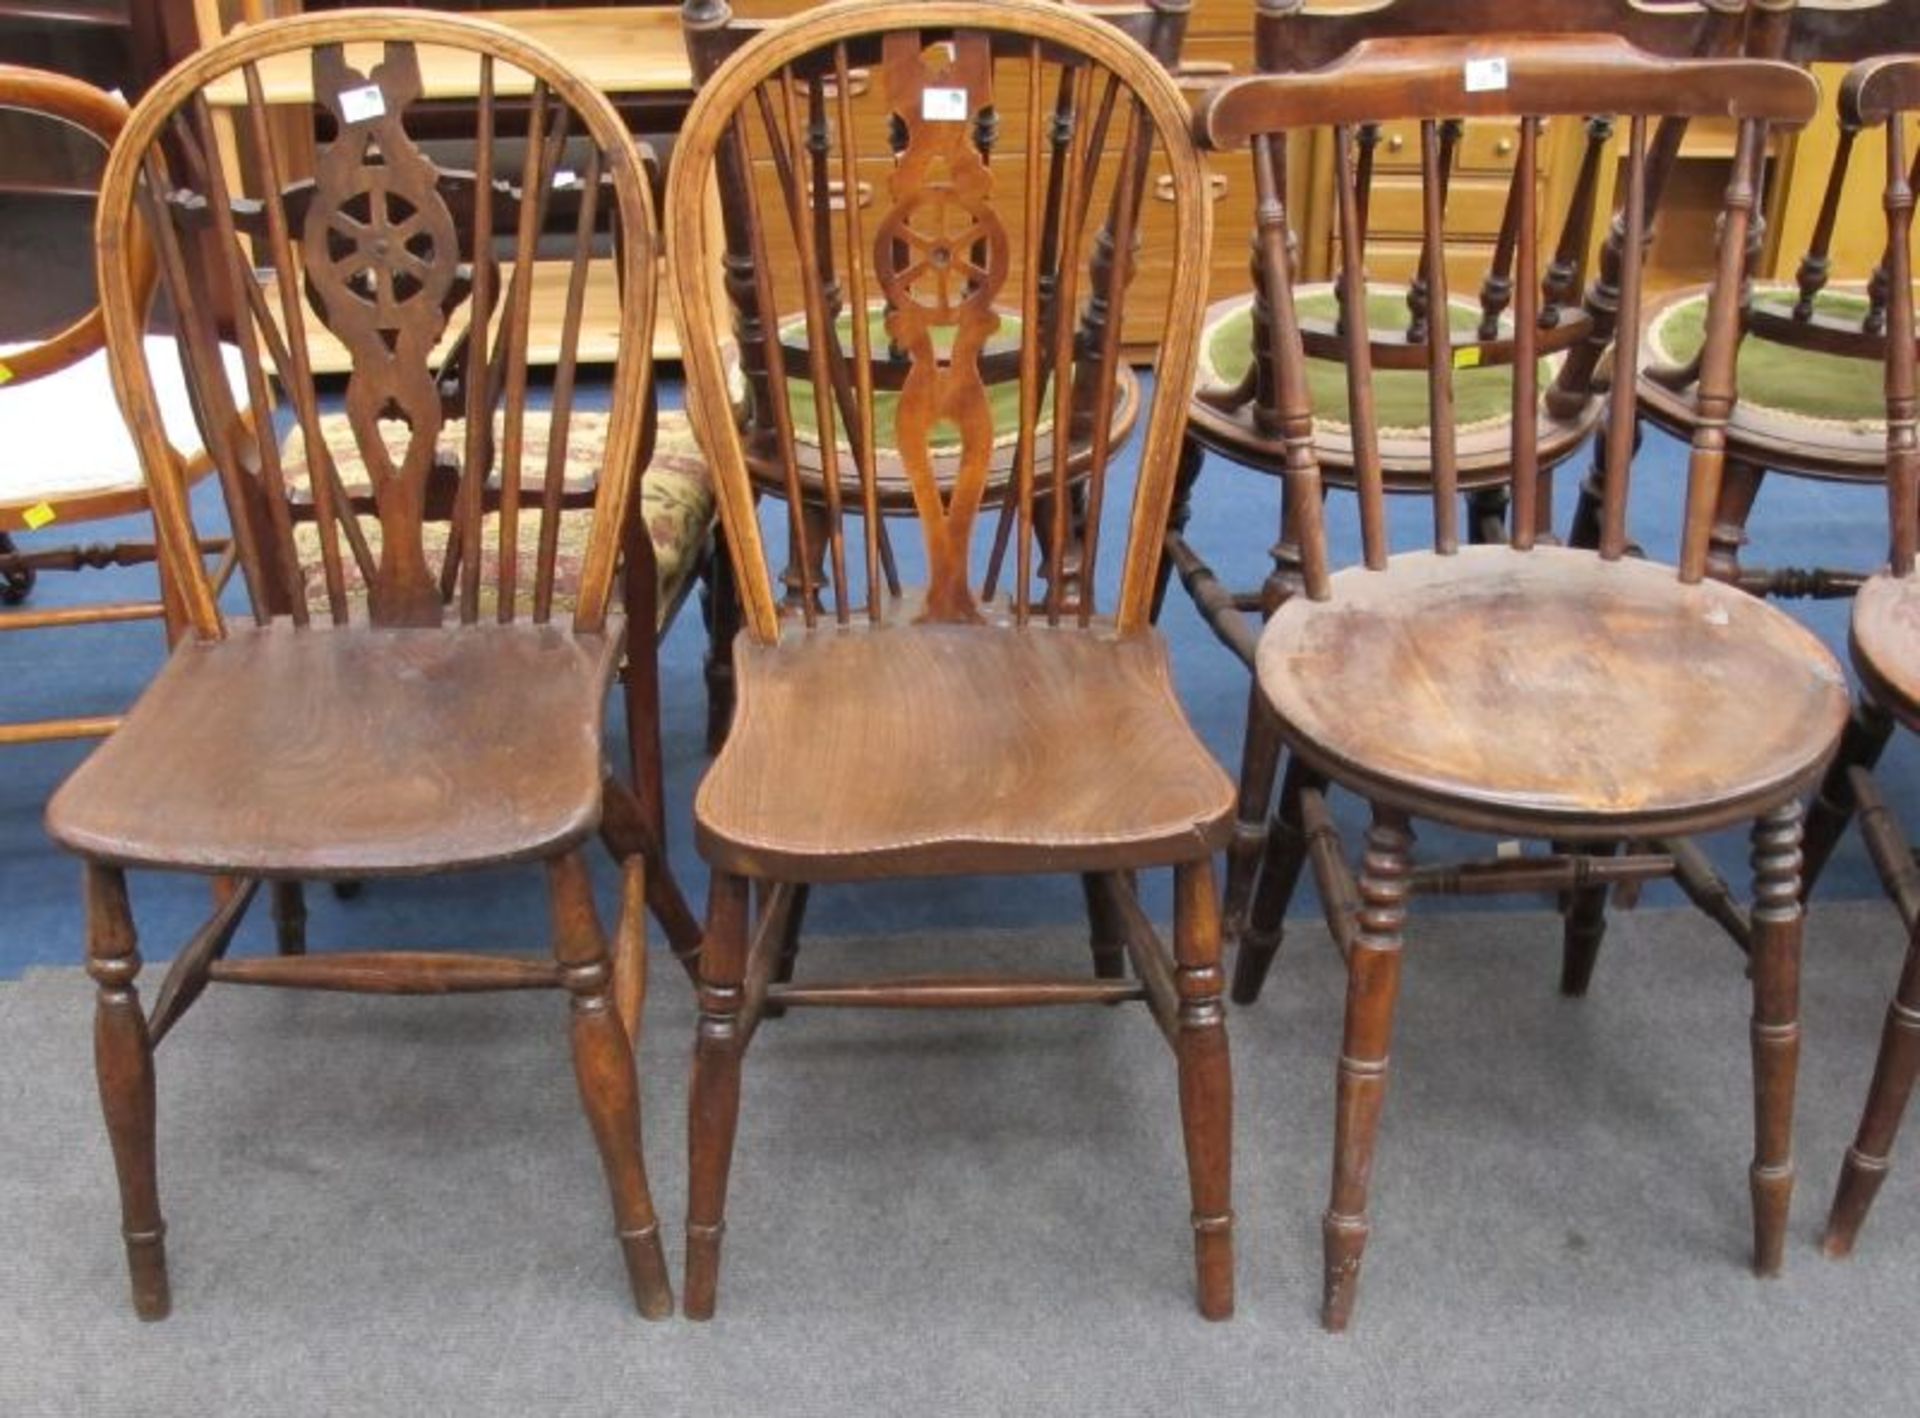 A Set of Four Spindle Back Circular Seat Dining Chairs Together With a Pair of Wheelback Single